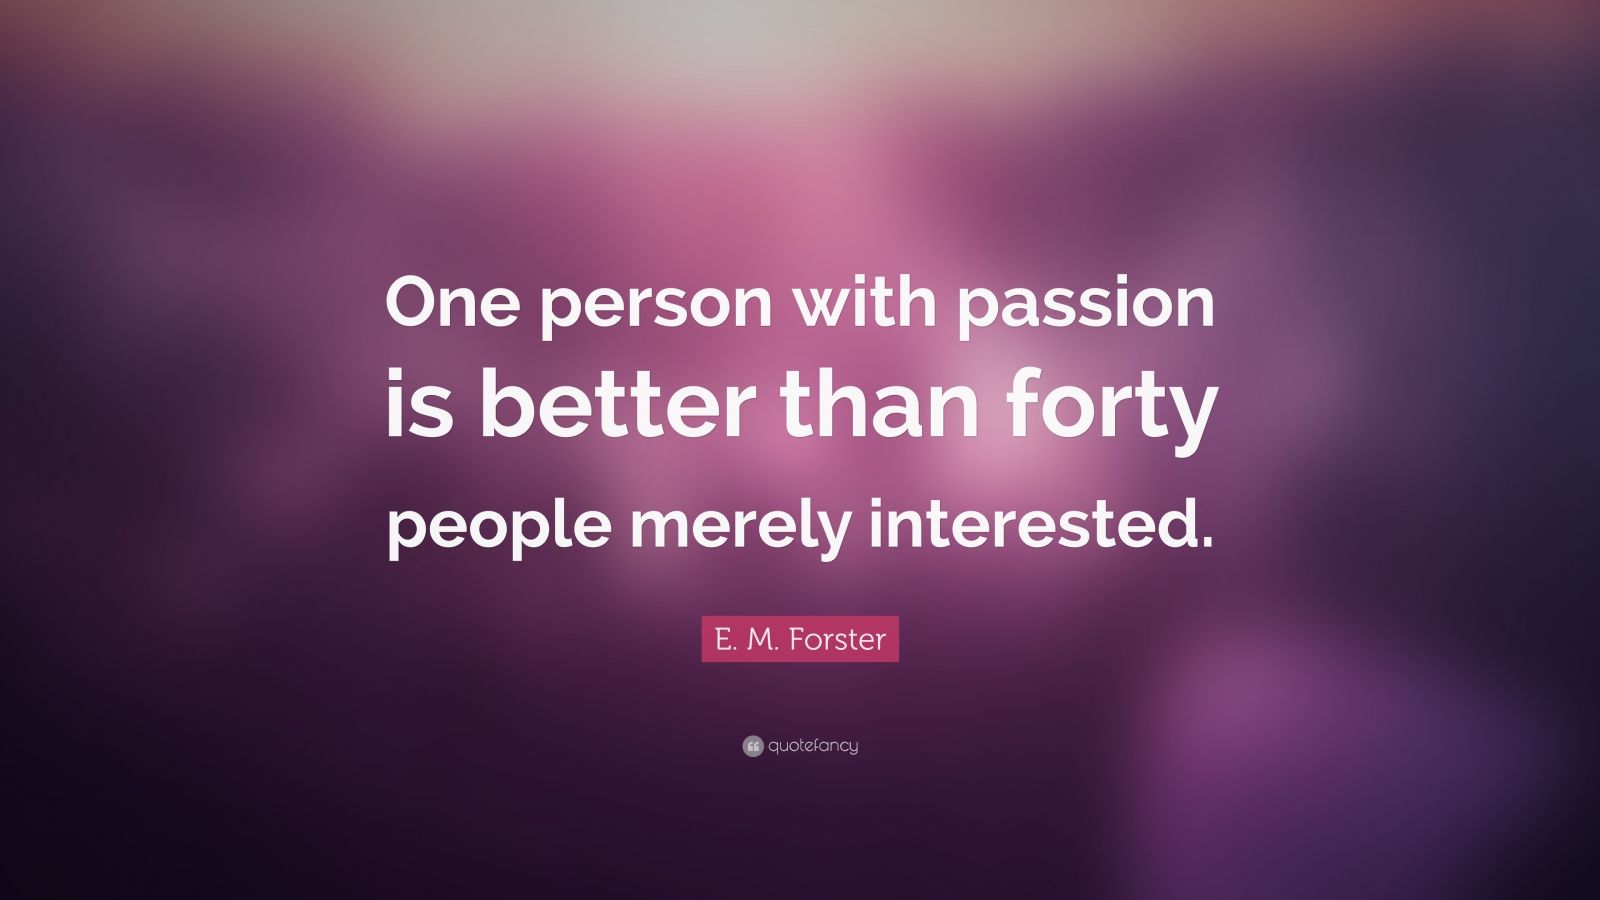 E M Forster Quote “one Person With Passion Is Better Than Forty